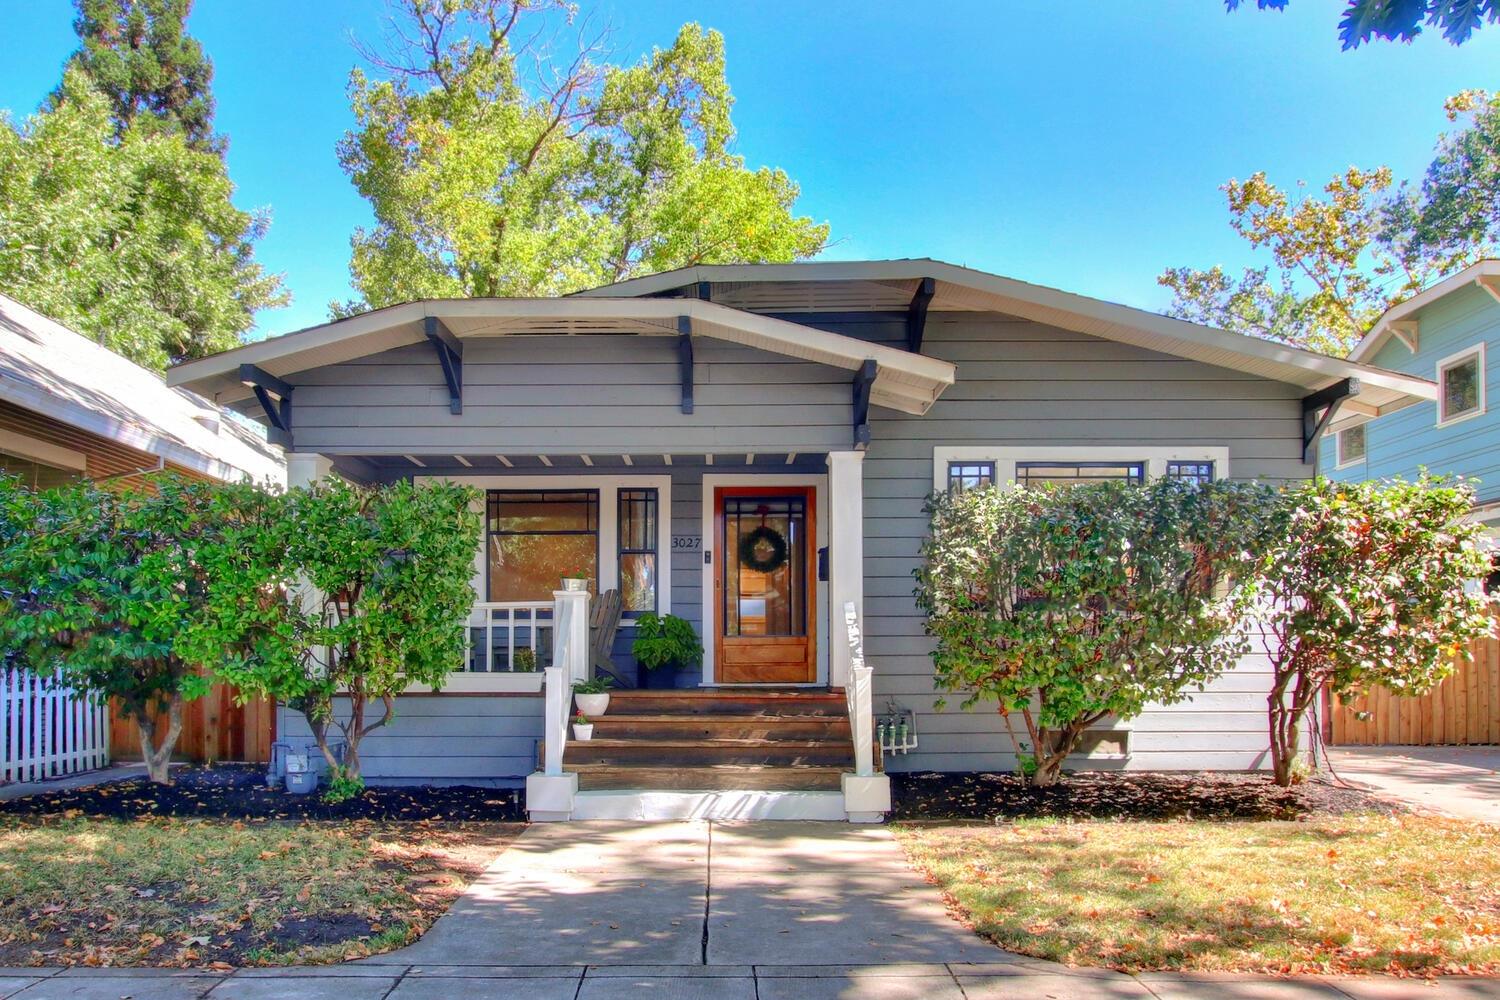 Welcome home to this charming East Sac bungalow. This light and bright house boasts a wonderfully re